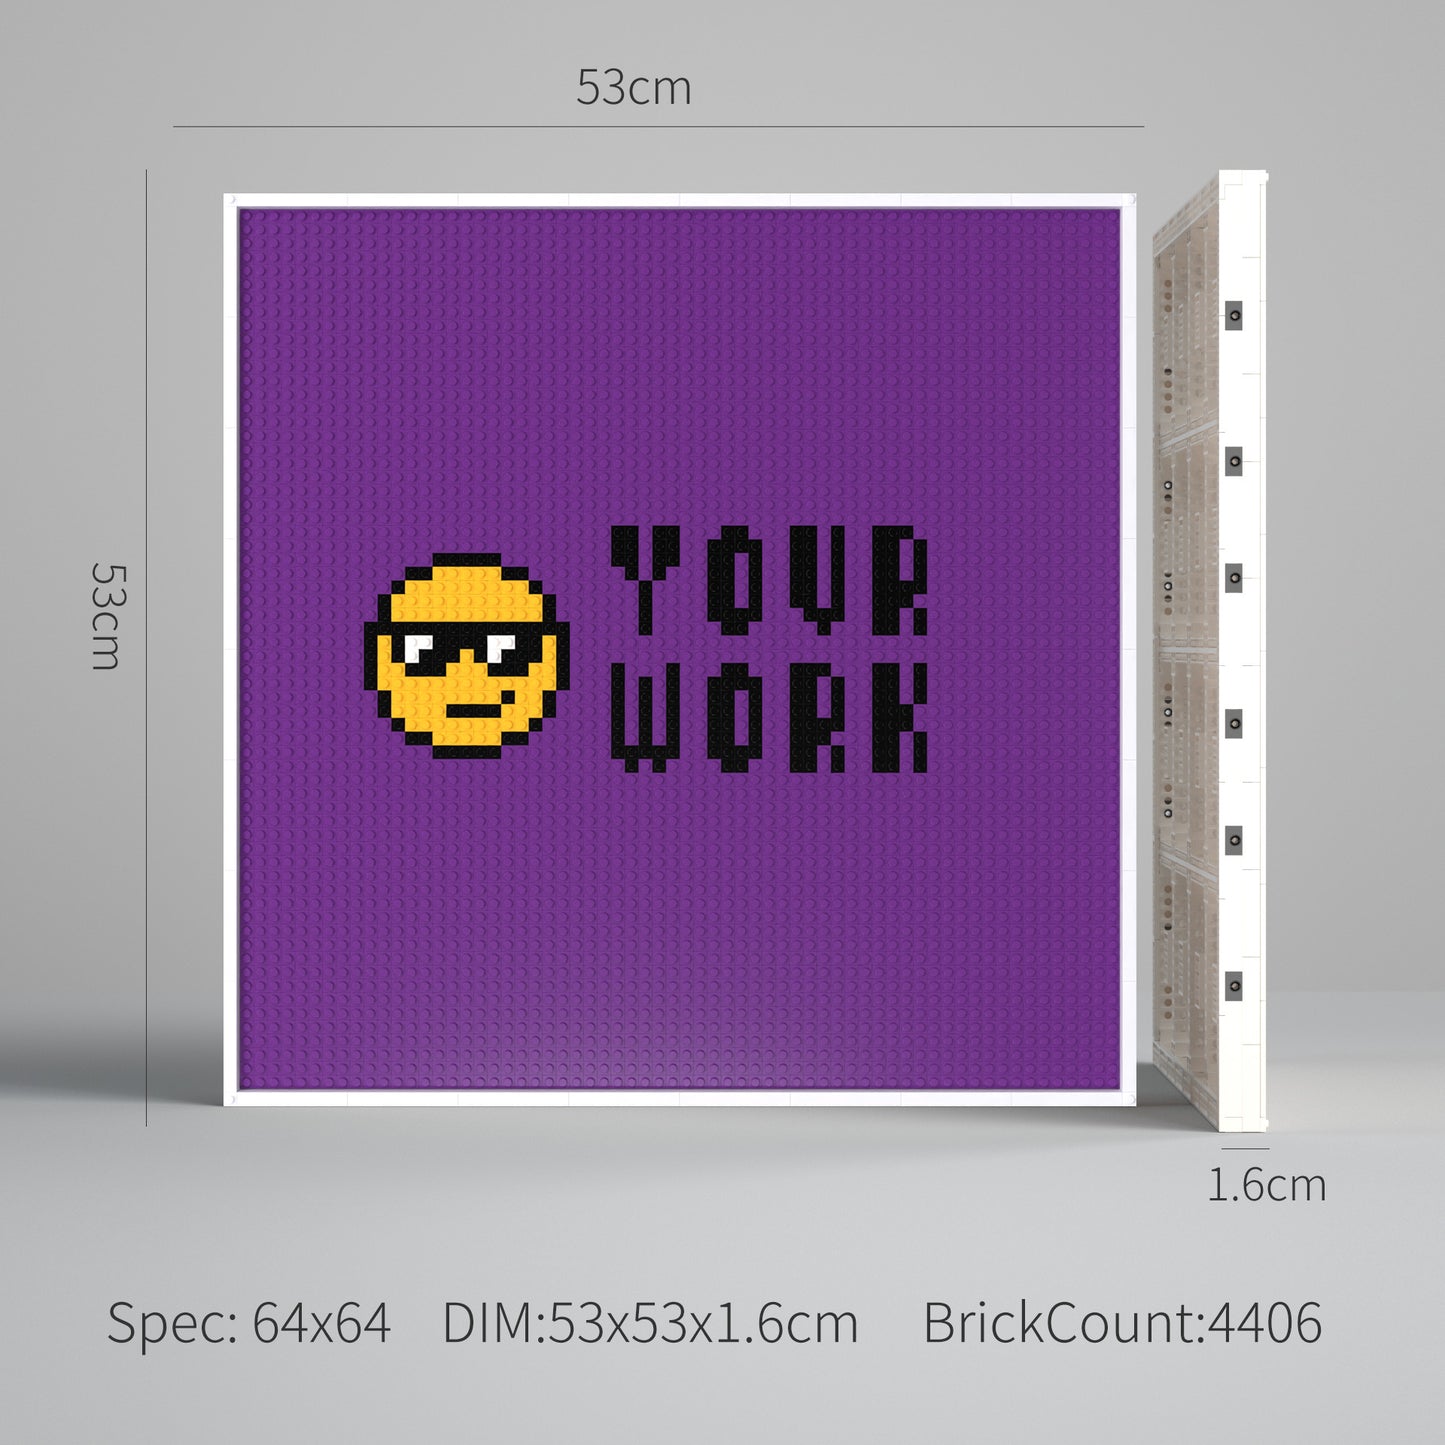 Customize a  64x64 Pixel Building Brick Mosaic Art Kit- We'll Ship Based on Your Design!